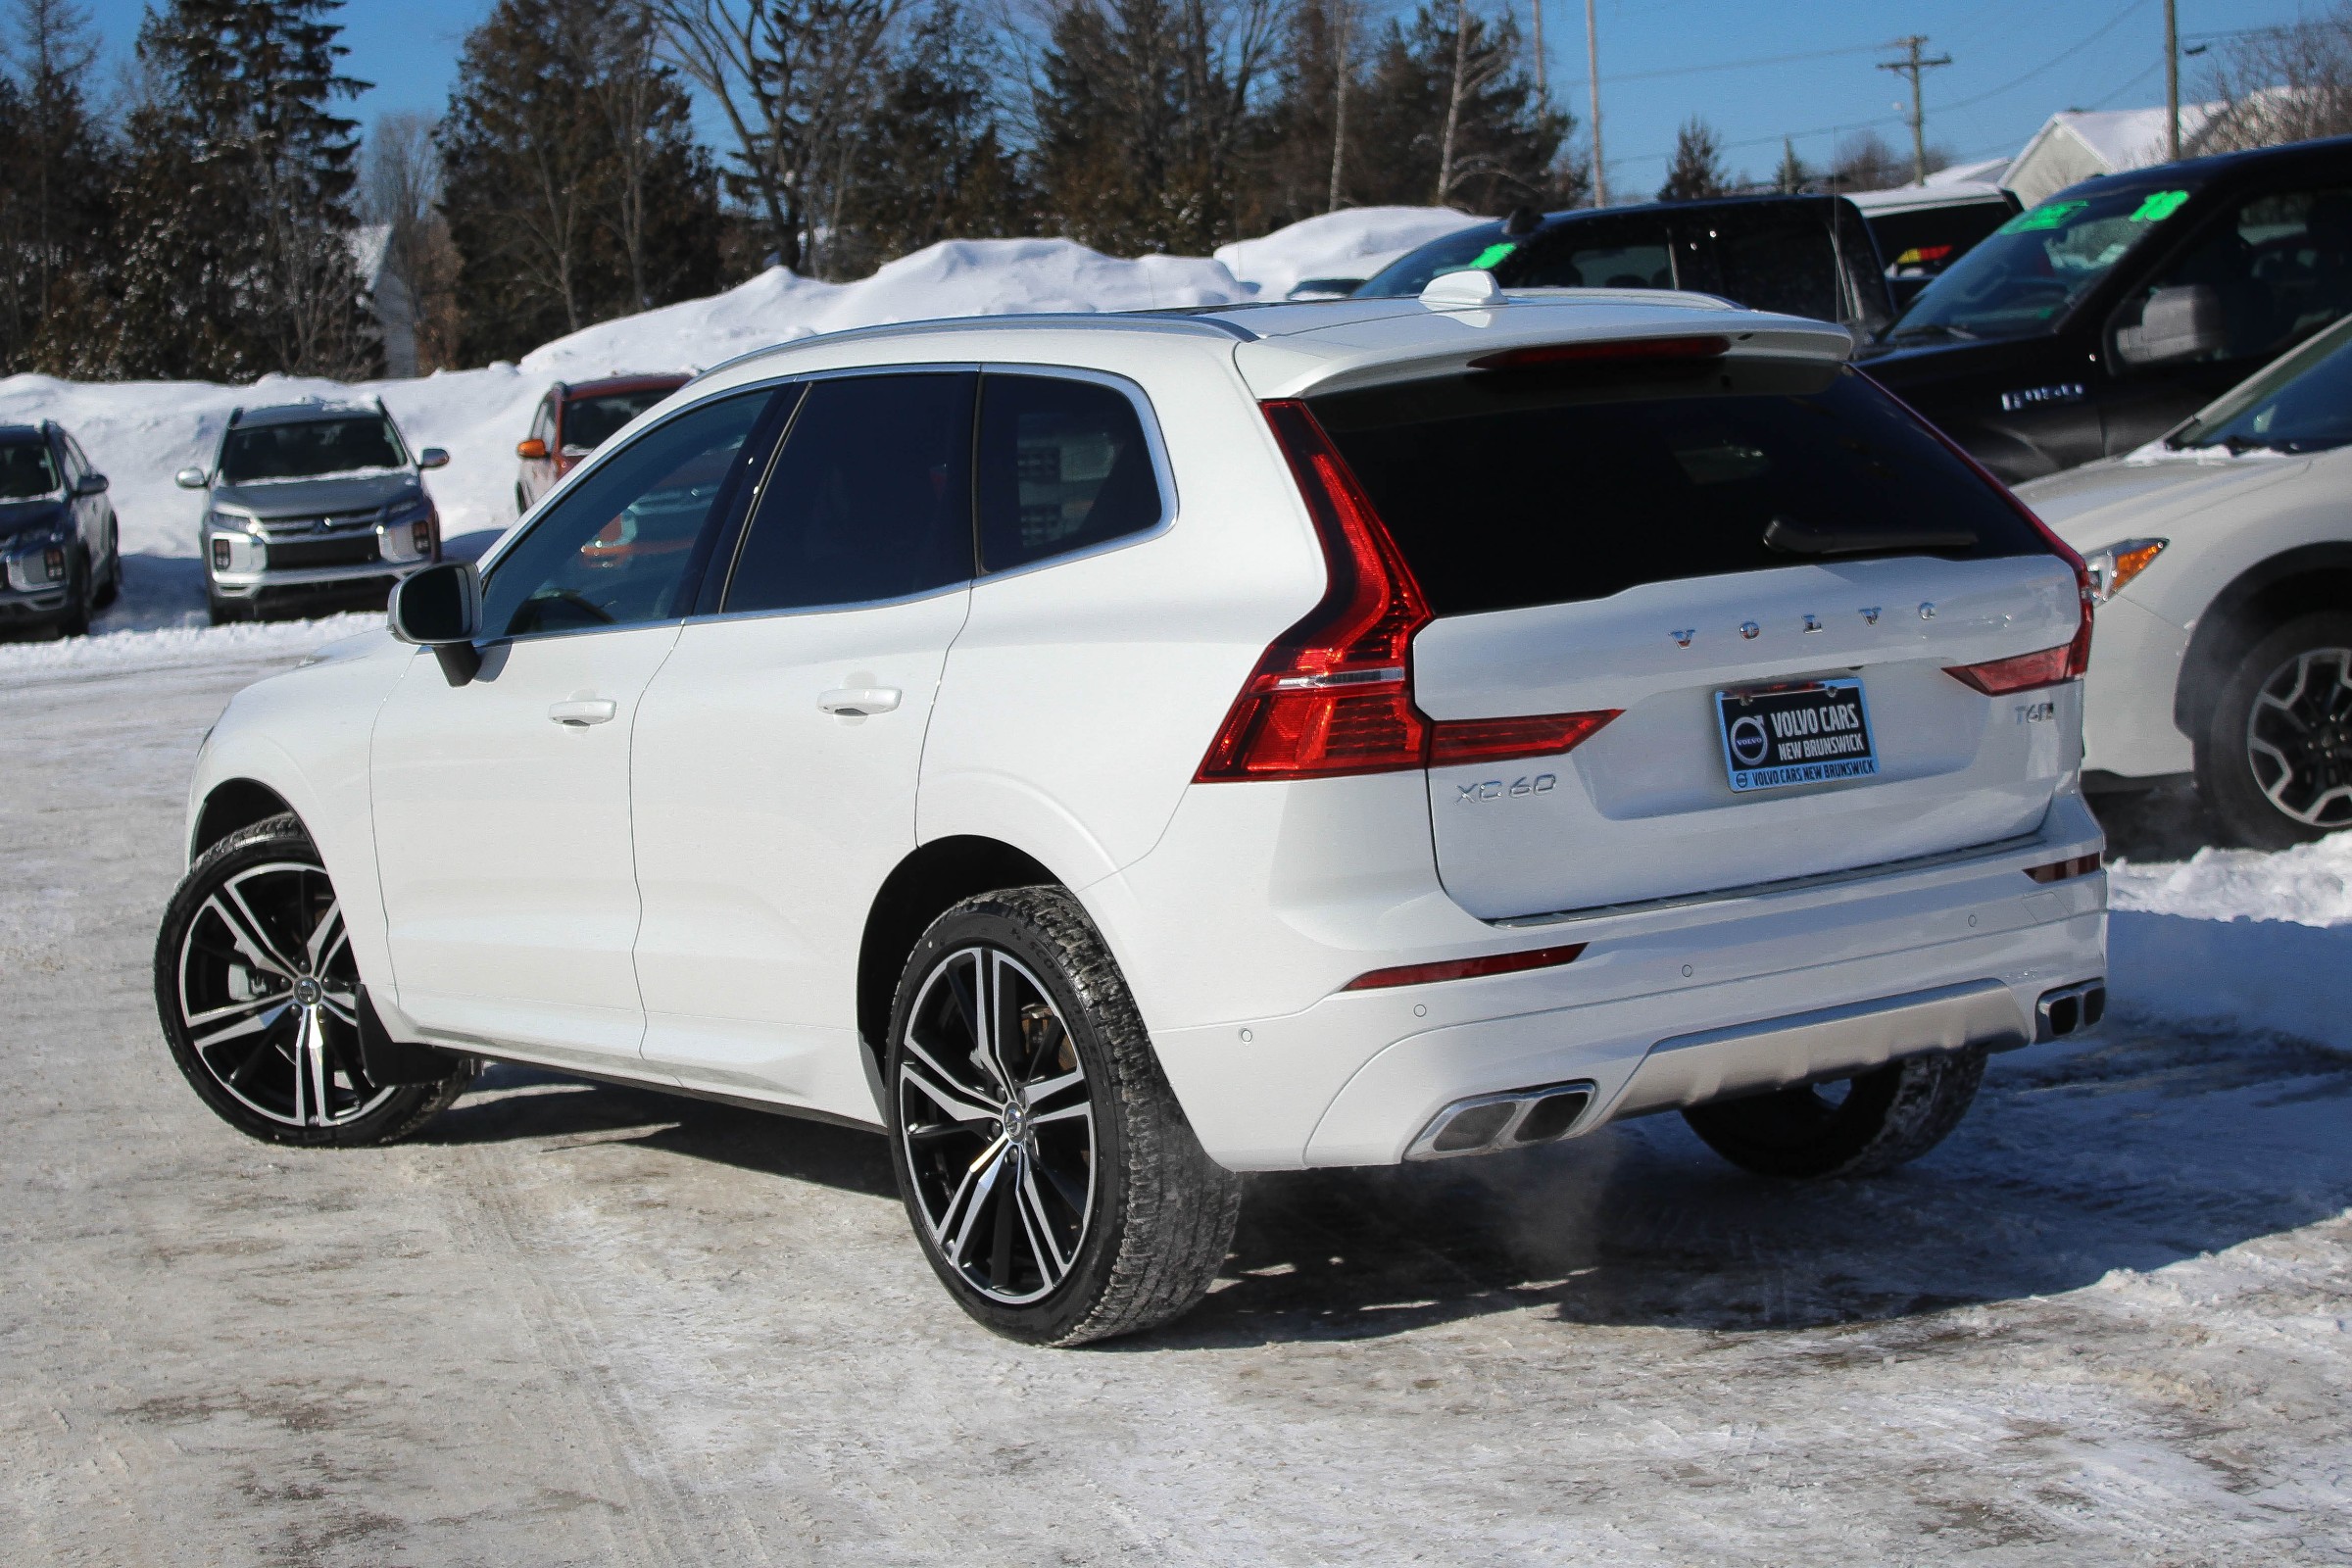 PreOwned 2019 Volvo XC60 T6 RDesign Compact Luxury Sport